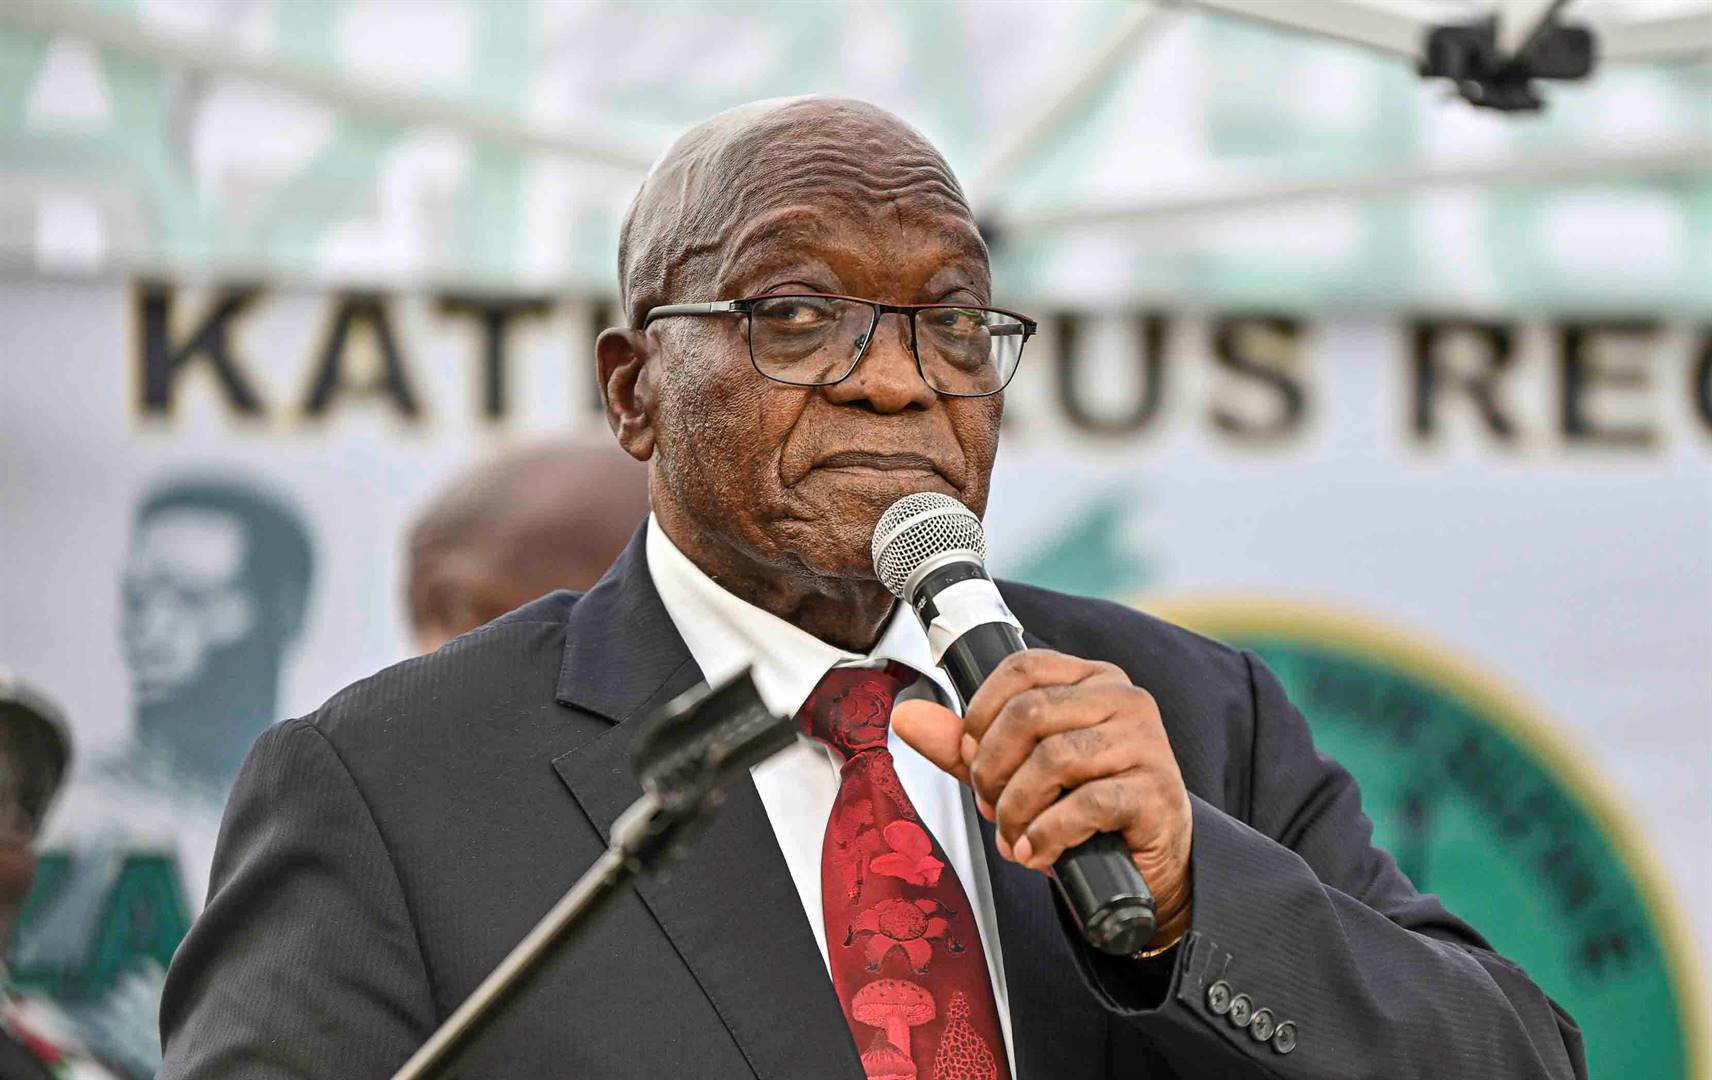 The Constitutional Court on Friday reserved judgment on the IEC's urgent appeal regarding former president Jacob Zuma’s eligibility to stand as a candidate for the uMkhonto weSizwe Party in the 29 May elections.